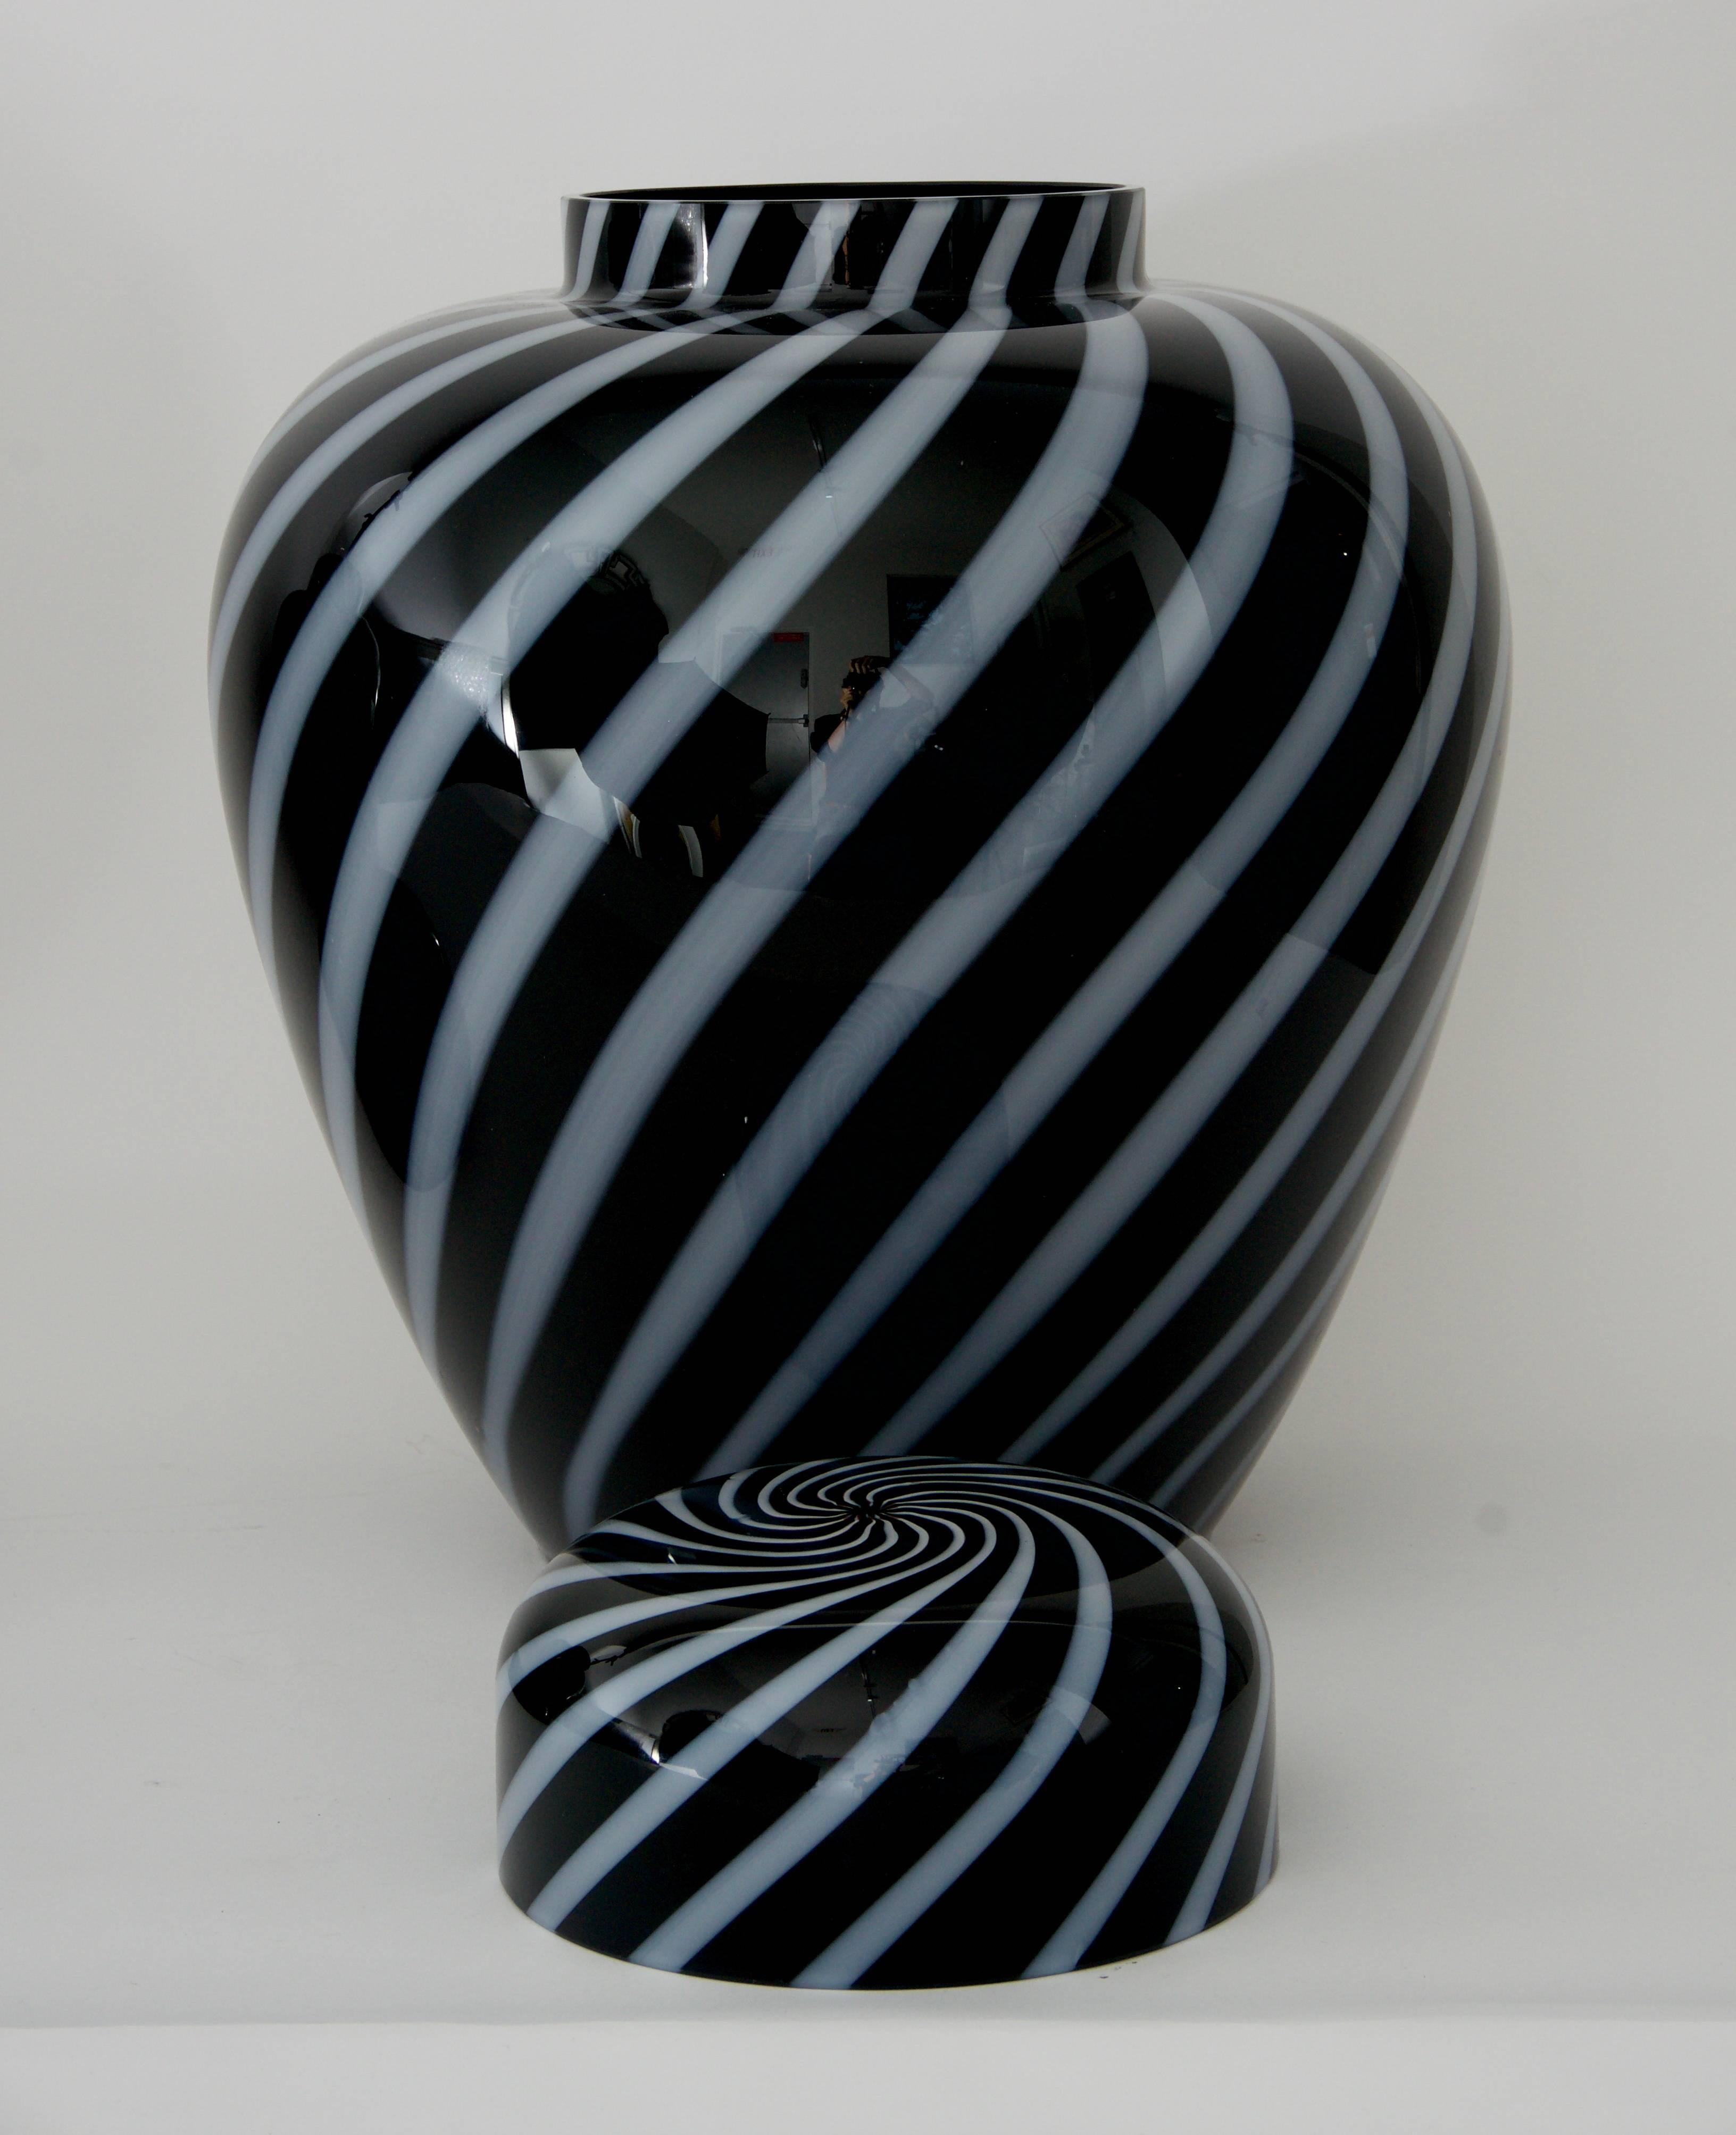 This stylish three-piece set of Vetri Murano glass was recently acquired from a Palm Beach estate and will make a definite statement in your home. The black and violet/white swirl pattern gives the pieces a great sense of movement.

Note: